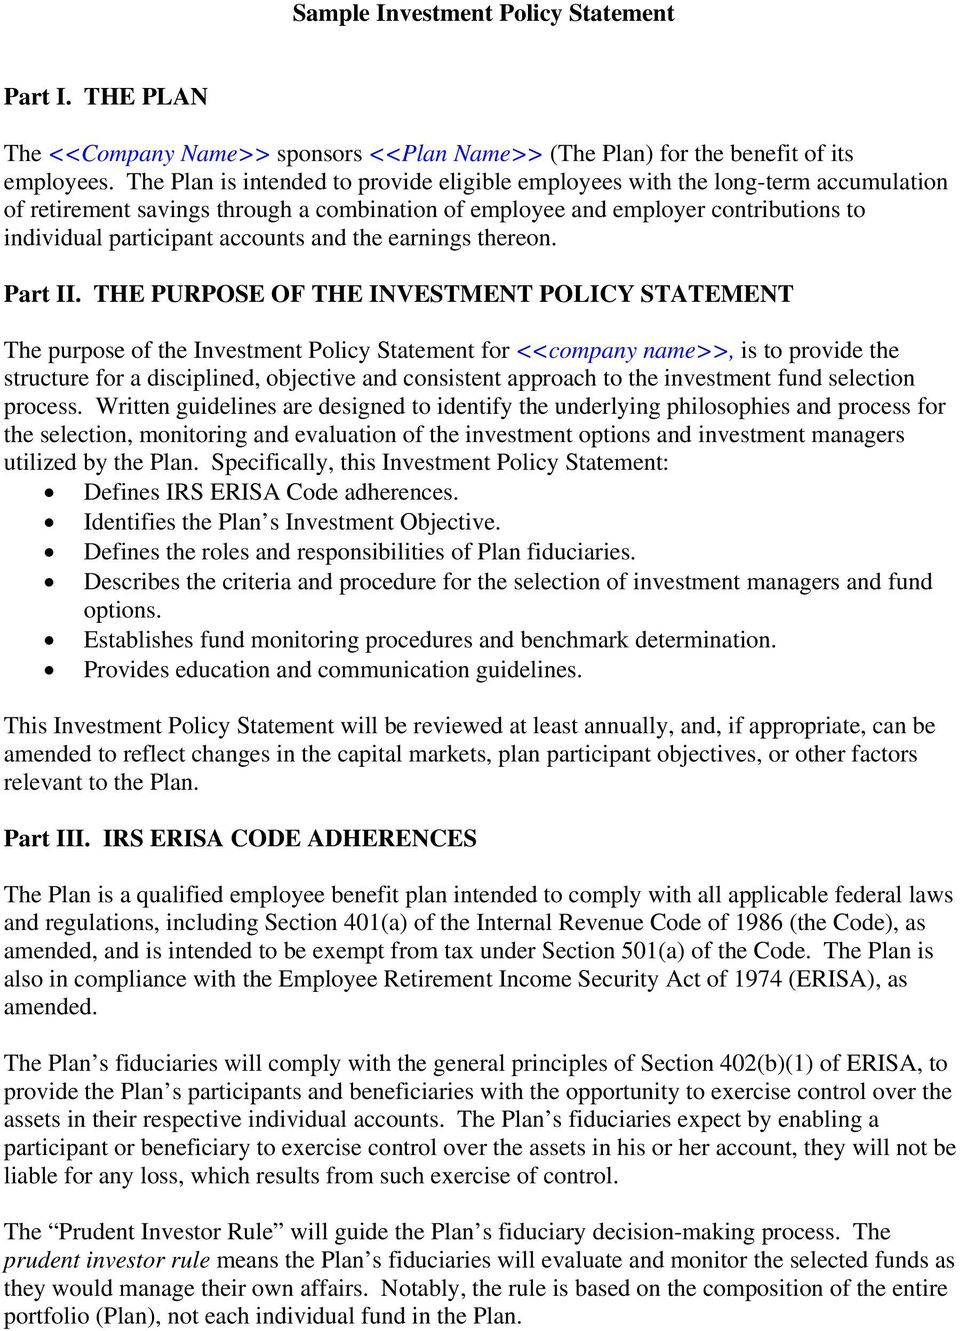 Sample Investment Policy Statement - Pdf Free Download Within Investment Policy Statement Template